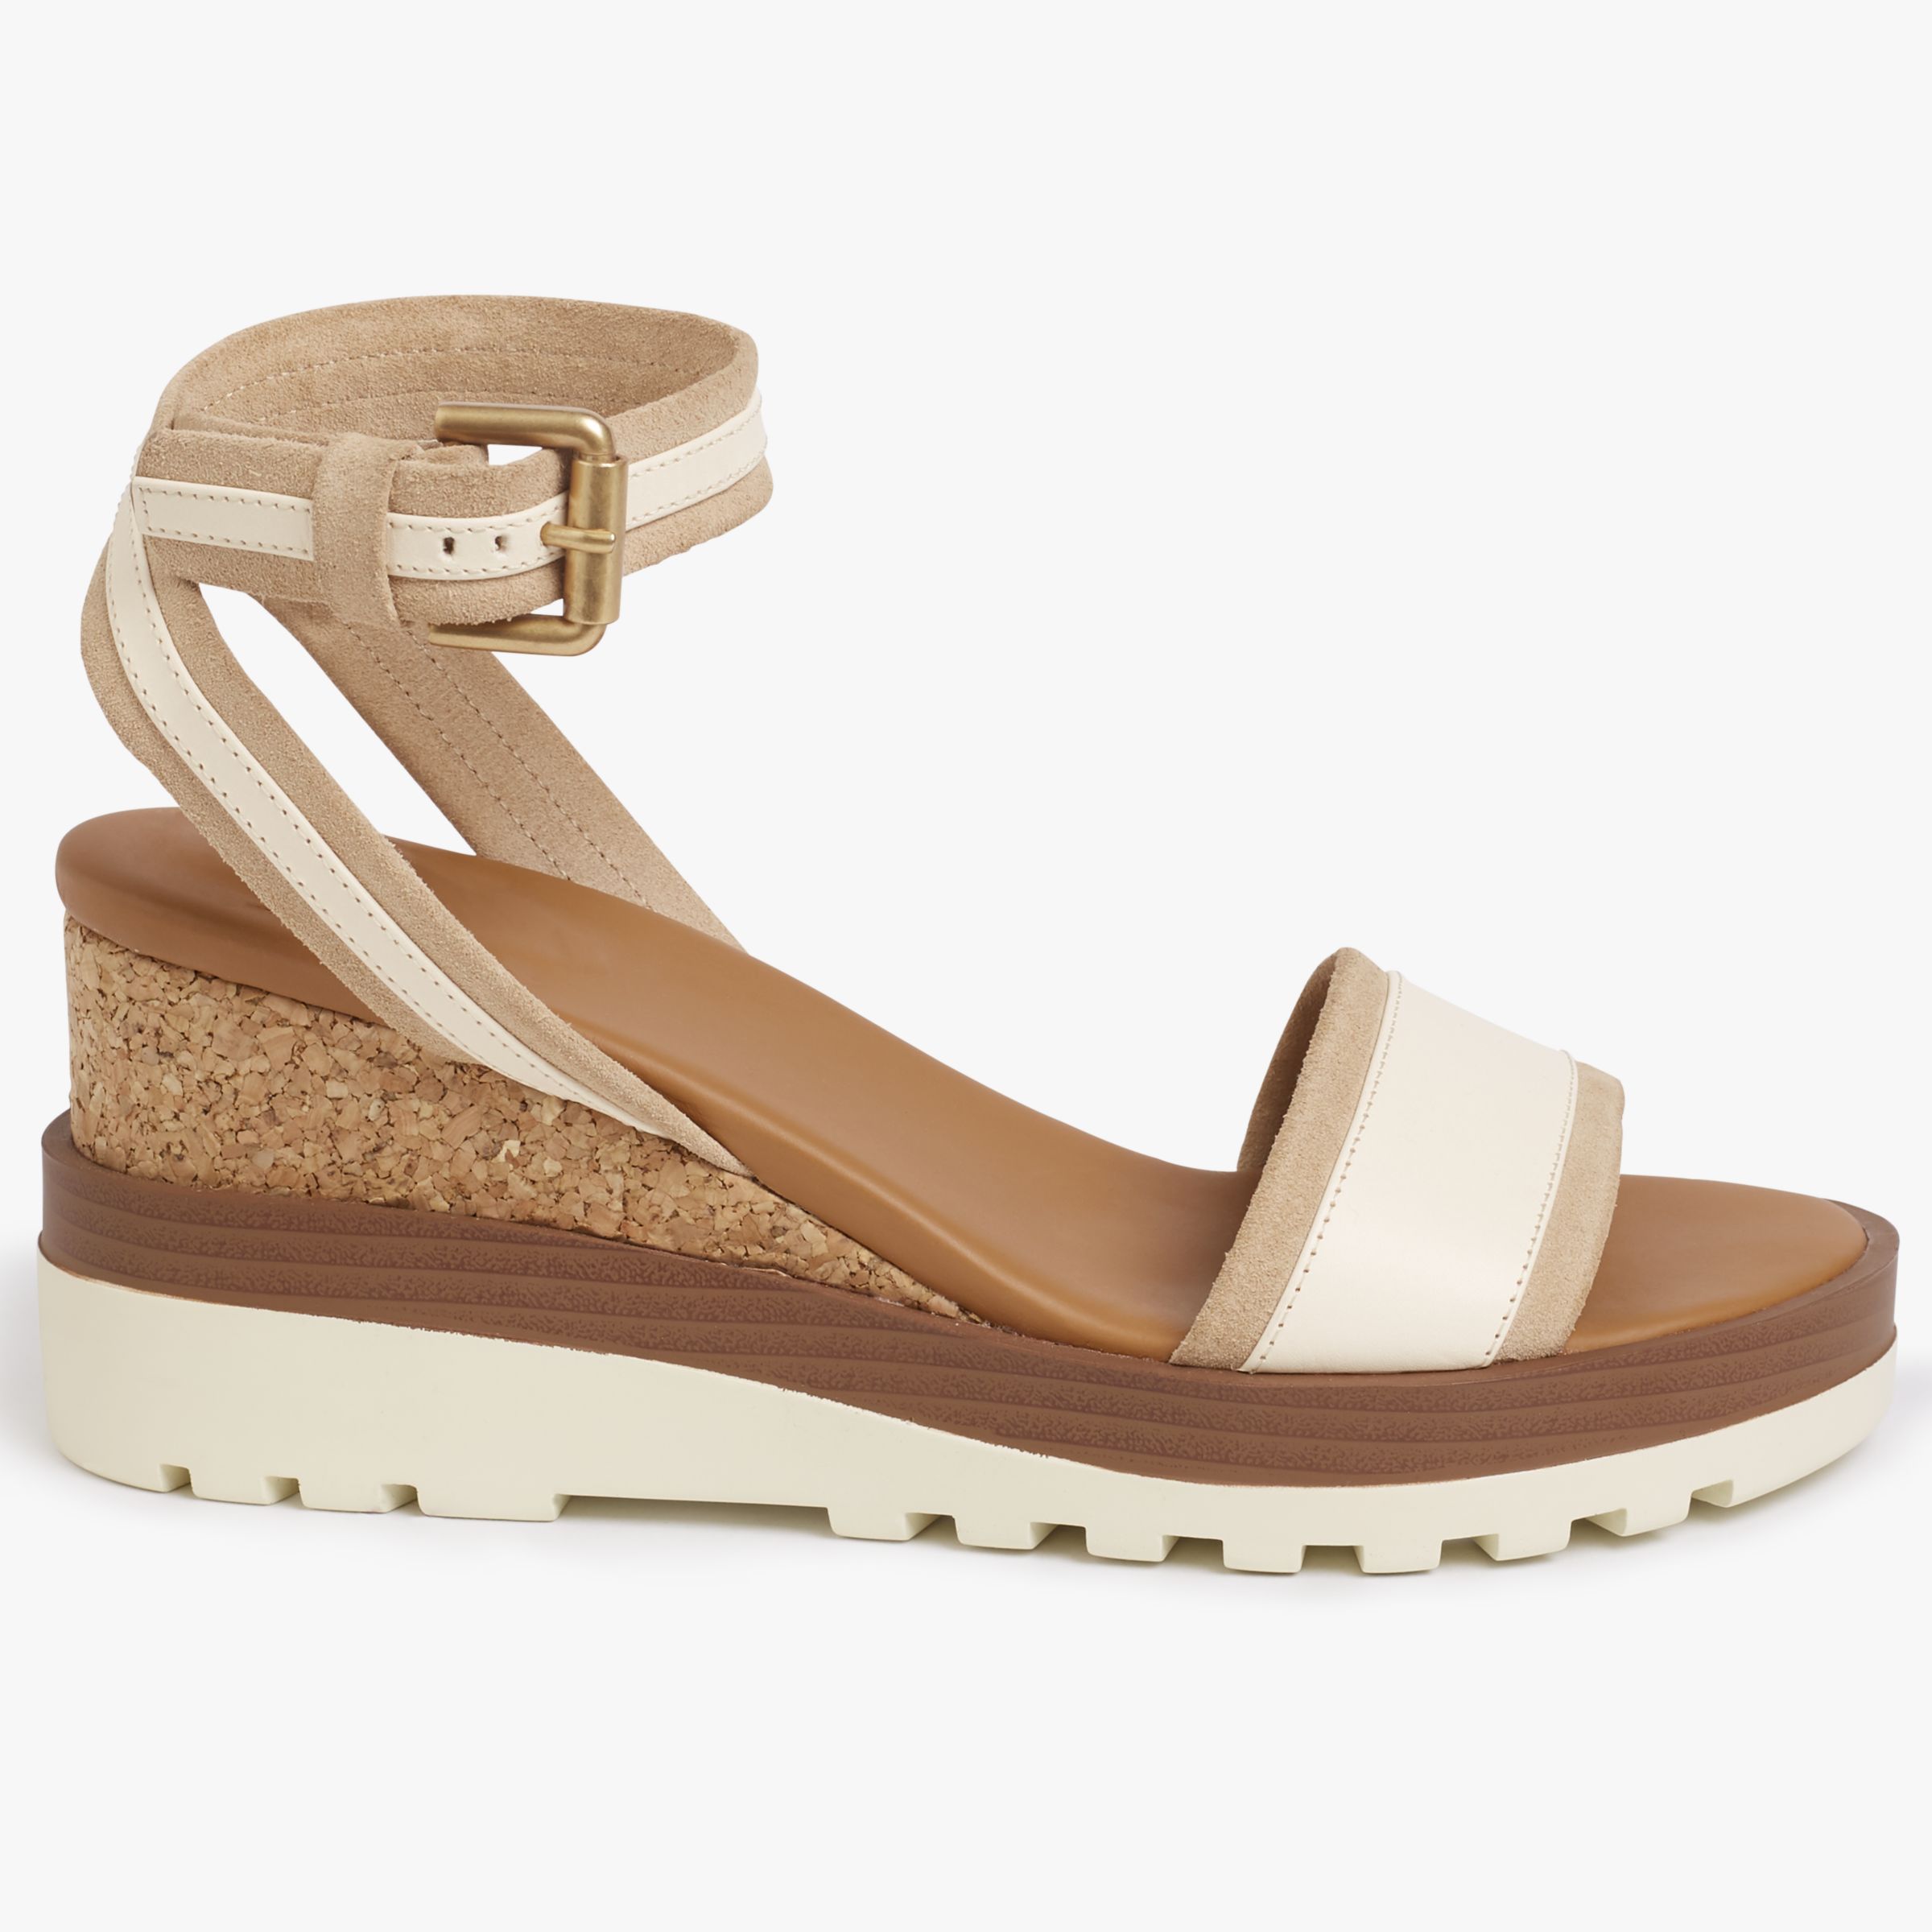 See by Chloé Robin Wedge Sandals, Cream at John Lewis & Partners